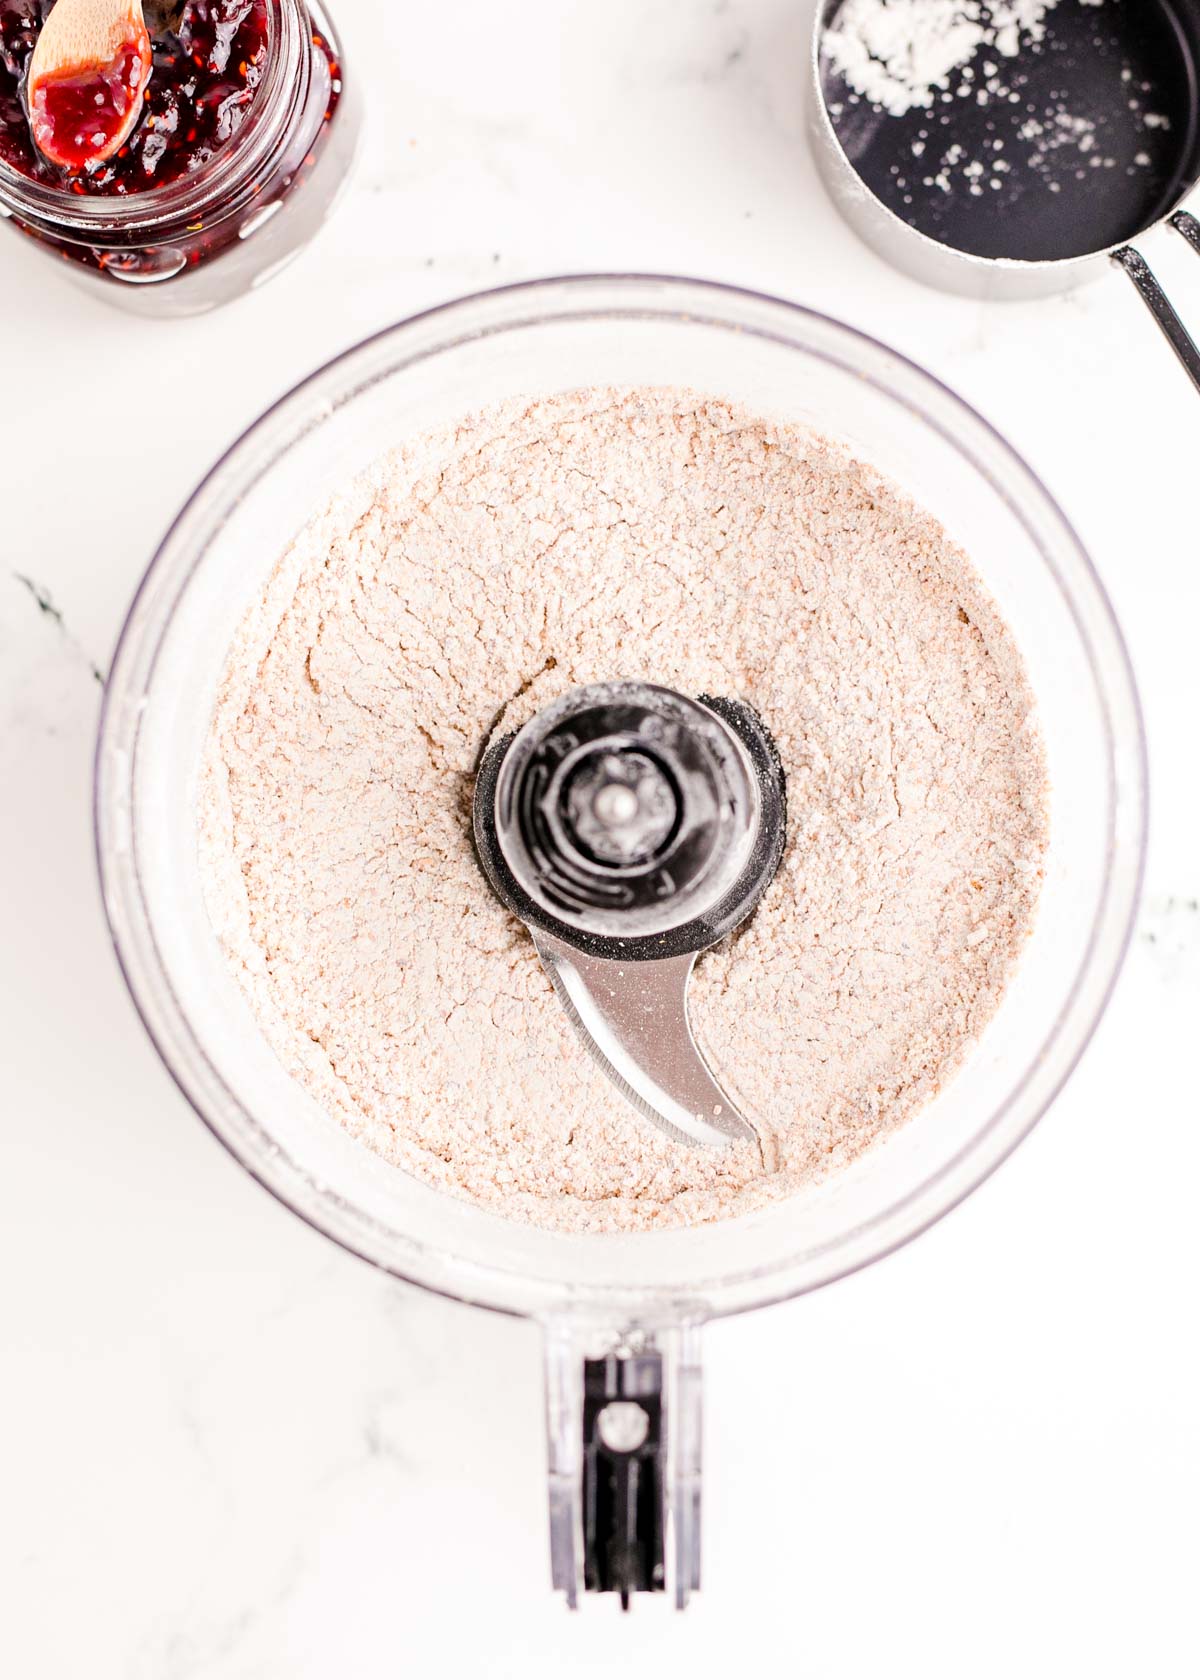 Almonds and flour mixed in a food processor.